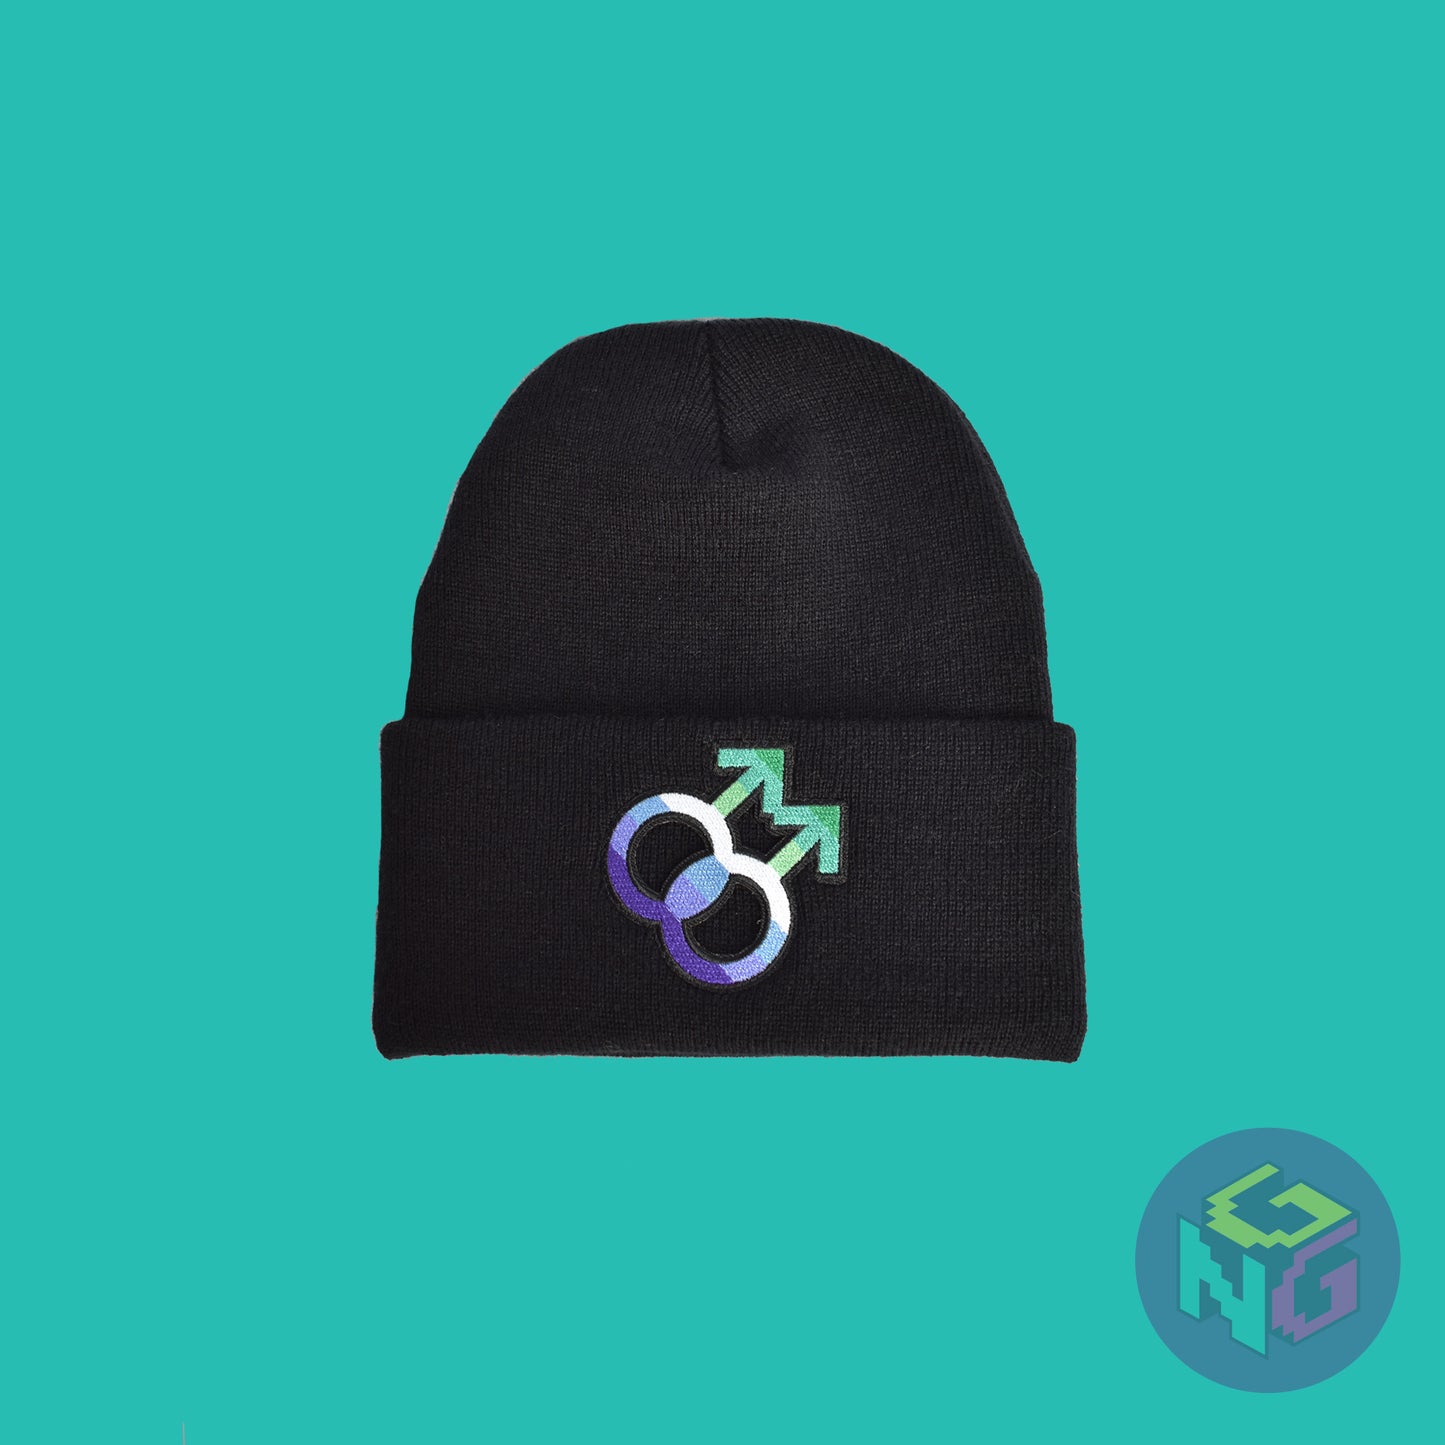 Black knit fabric beanie with the gay symbol in greens, blues, and white on the front. It is laying flat